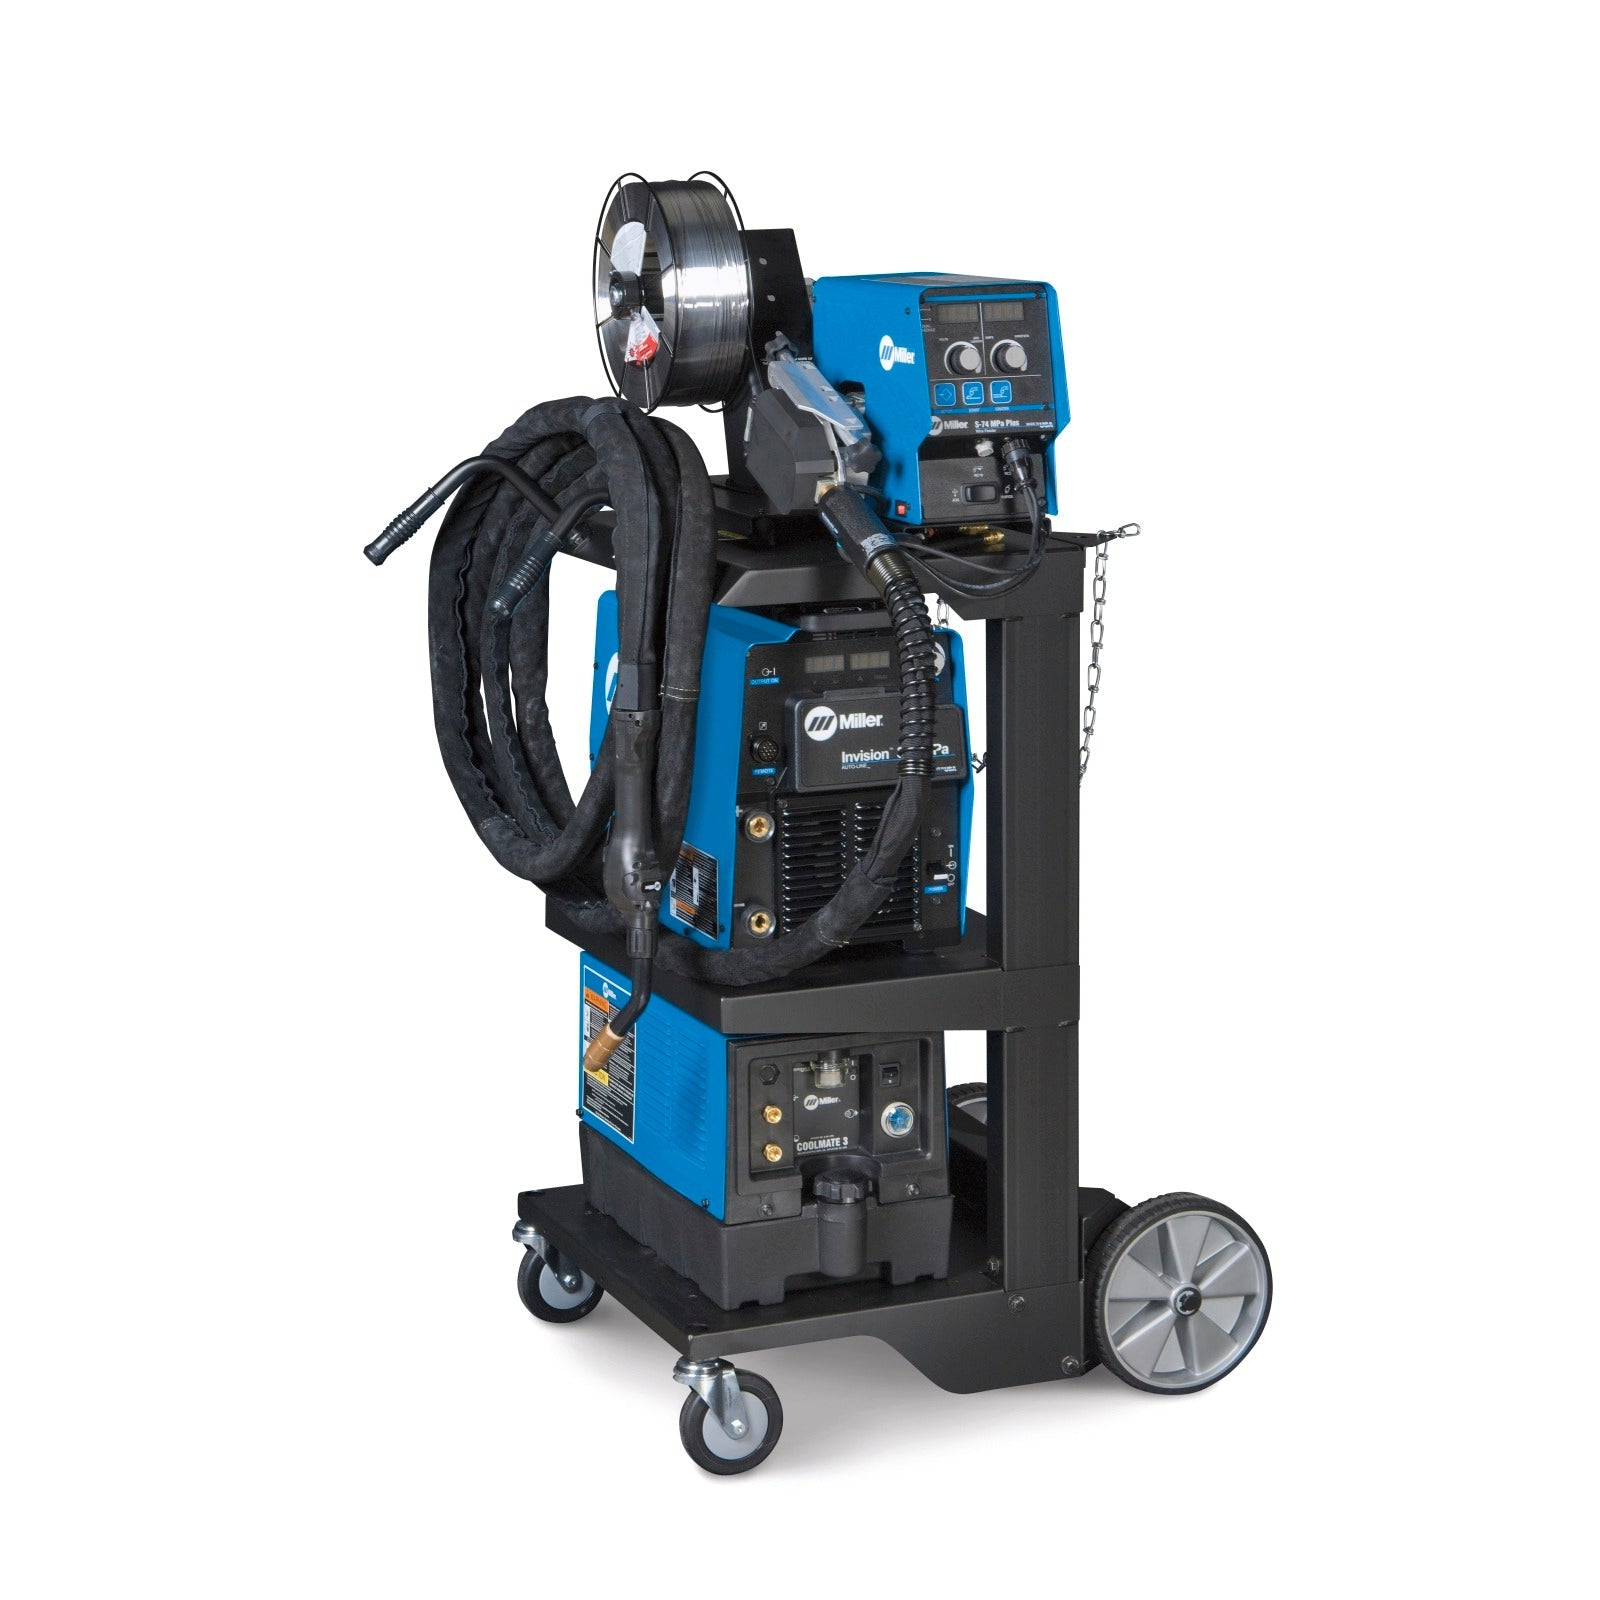 Miller Invision 352 MPa MIG Welder with Aux Power, Feeder, Accessory Package, and Cart (951379)